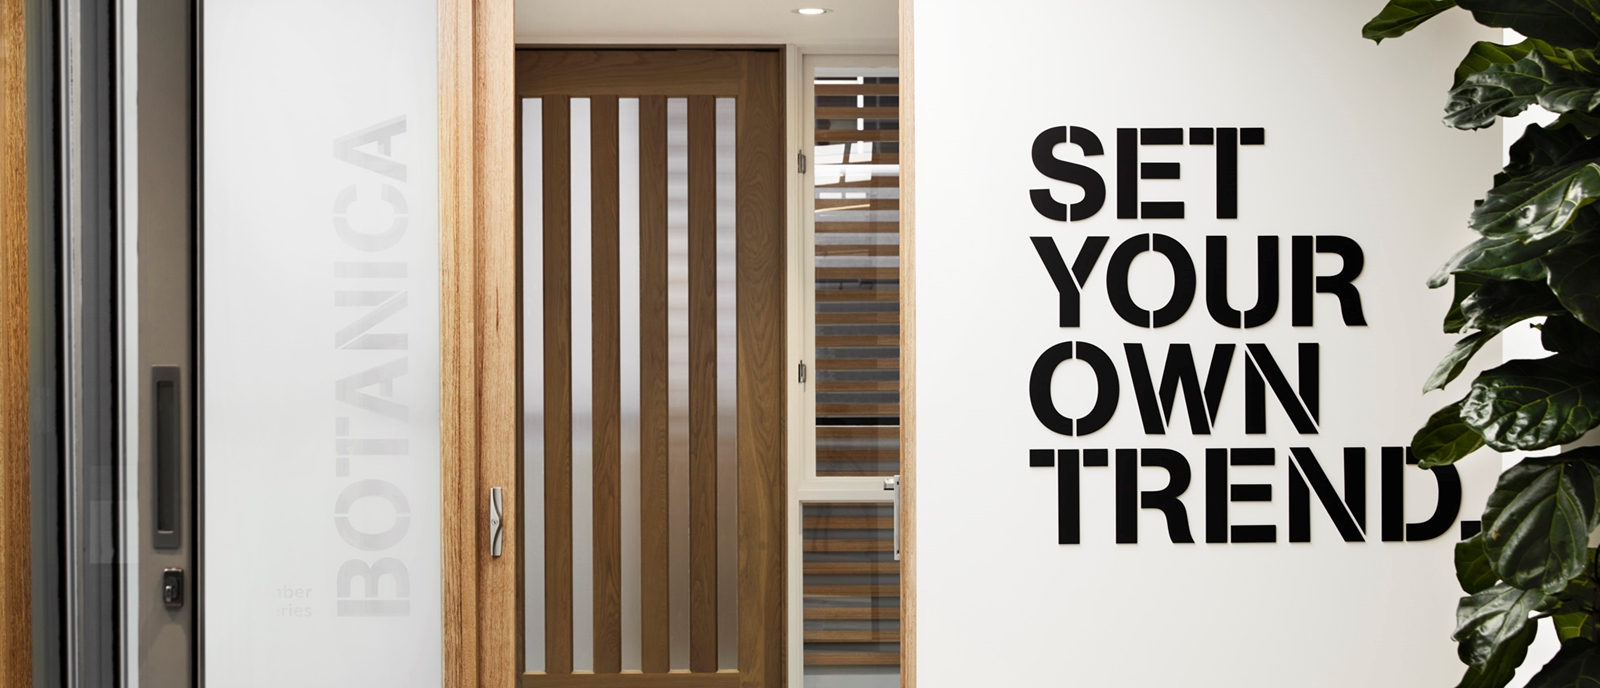 Trend Hawthorn Showroom Set Your Own Trend Signage